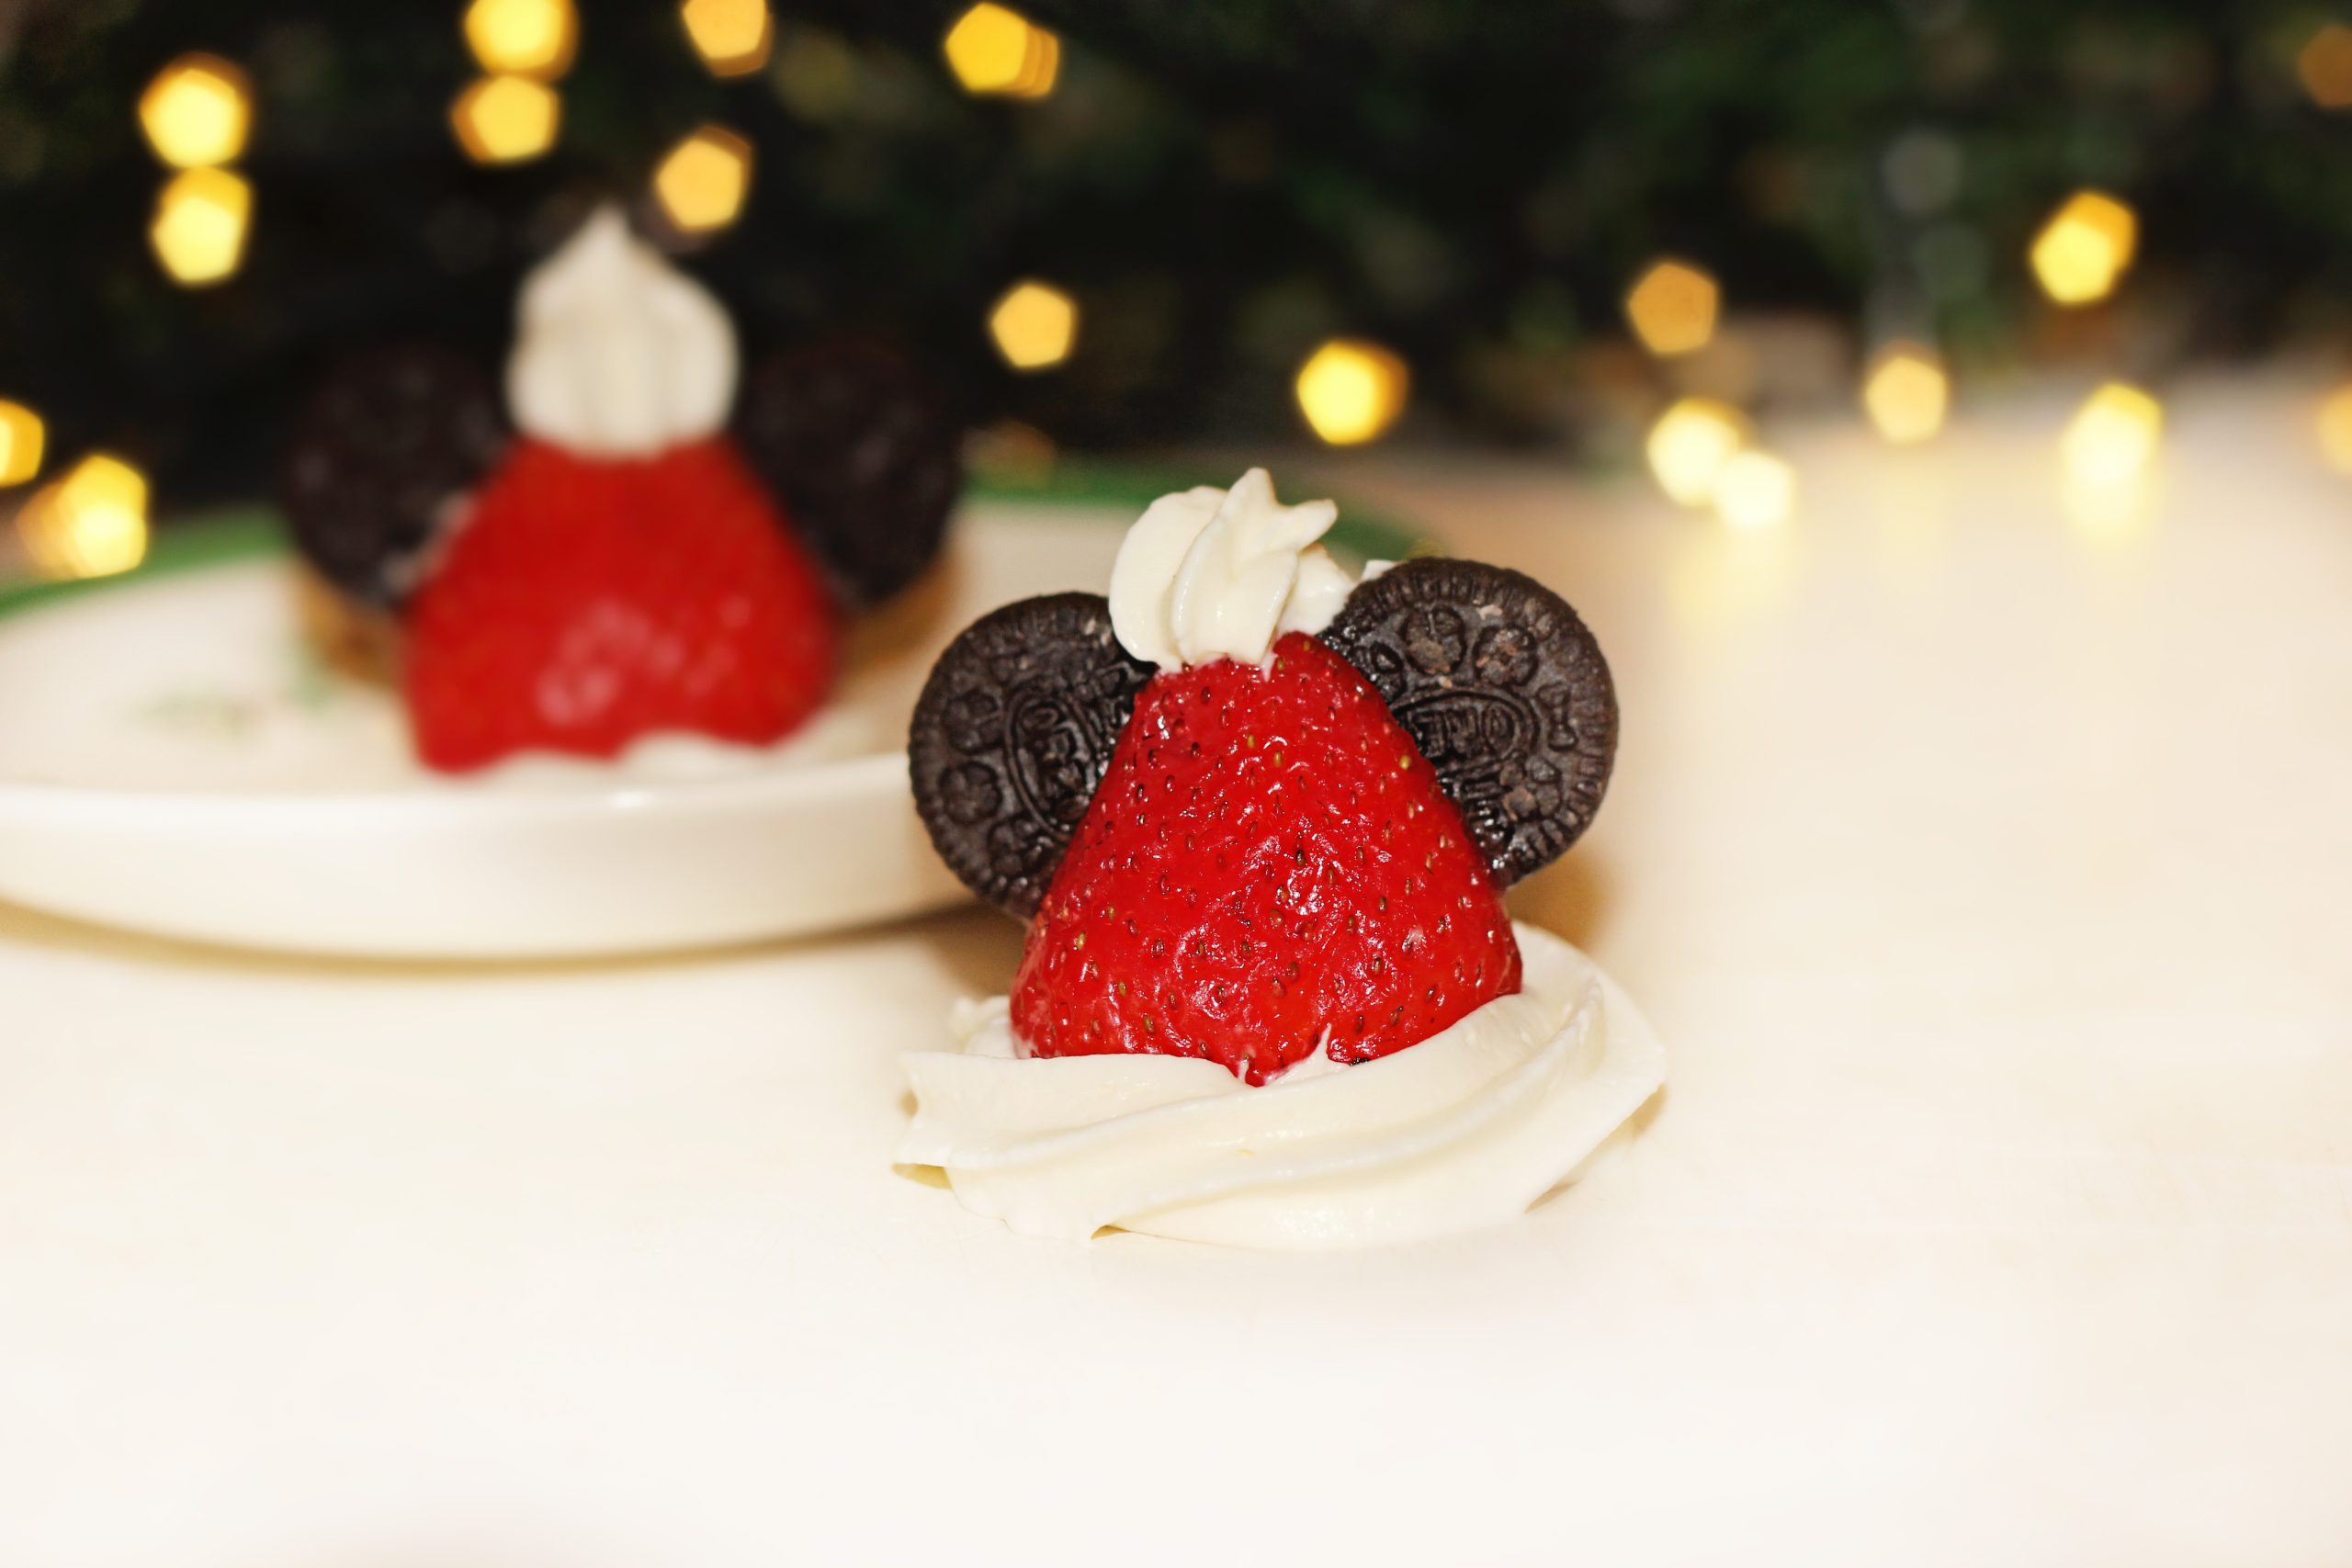 How to Make Mickey Mouse Santa Strawberries